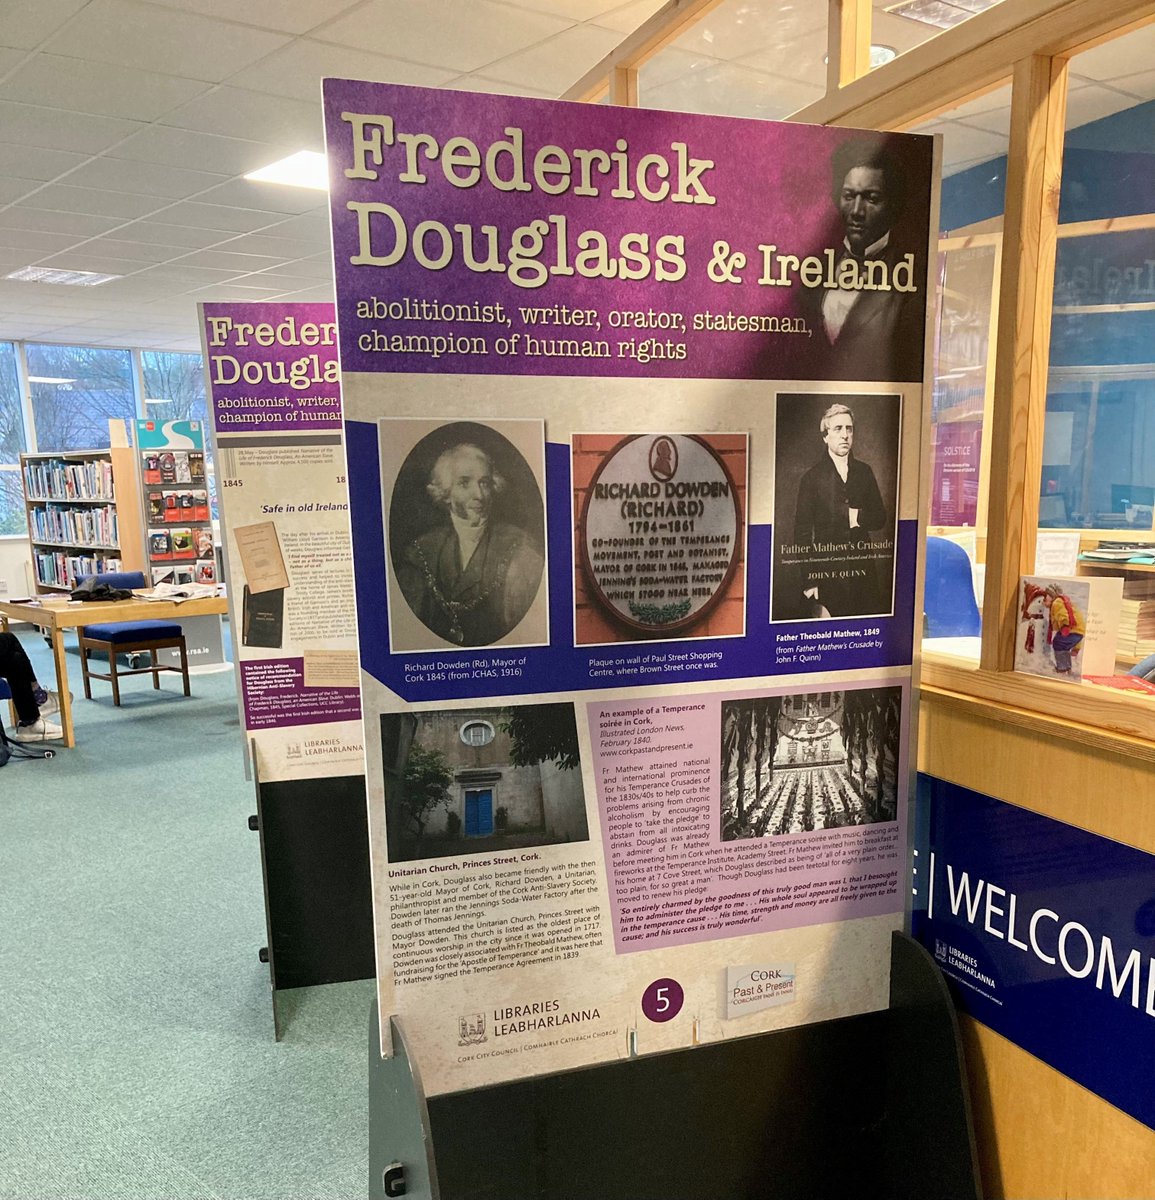 Douglass Day is celebrated on the 14 of February each year. To commemorate this special occasion, Blackpool Library is displaying an exhibition exploring the connection between Frederick Douglass and Ireland. Be sure to check it out on your next visit to Blackpool Library.